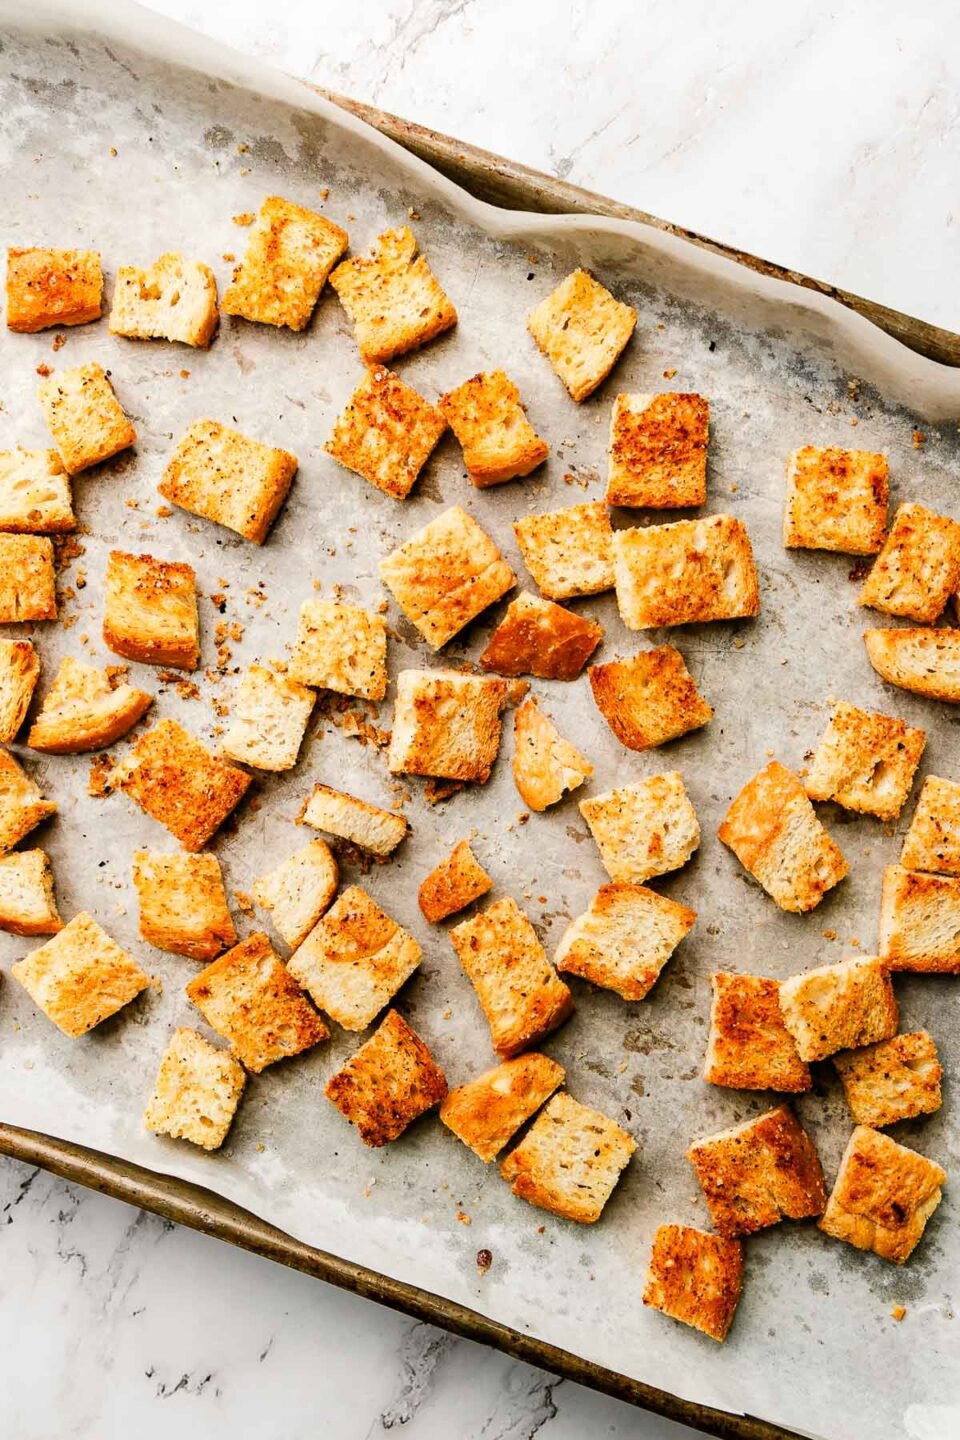 An overhead shot of sourdough croutons on a parchment paper-covered sheet pan, sitting atop a white marbled surface.